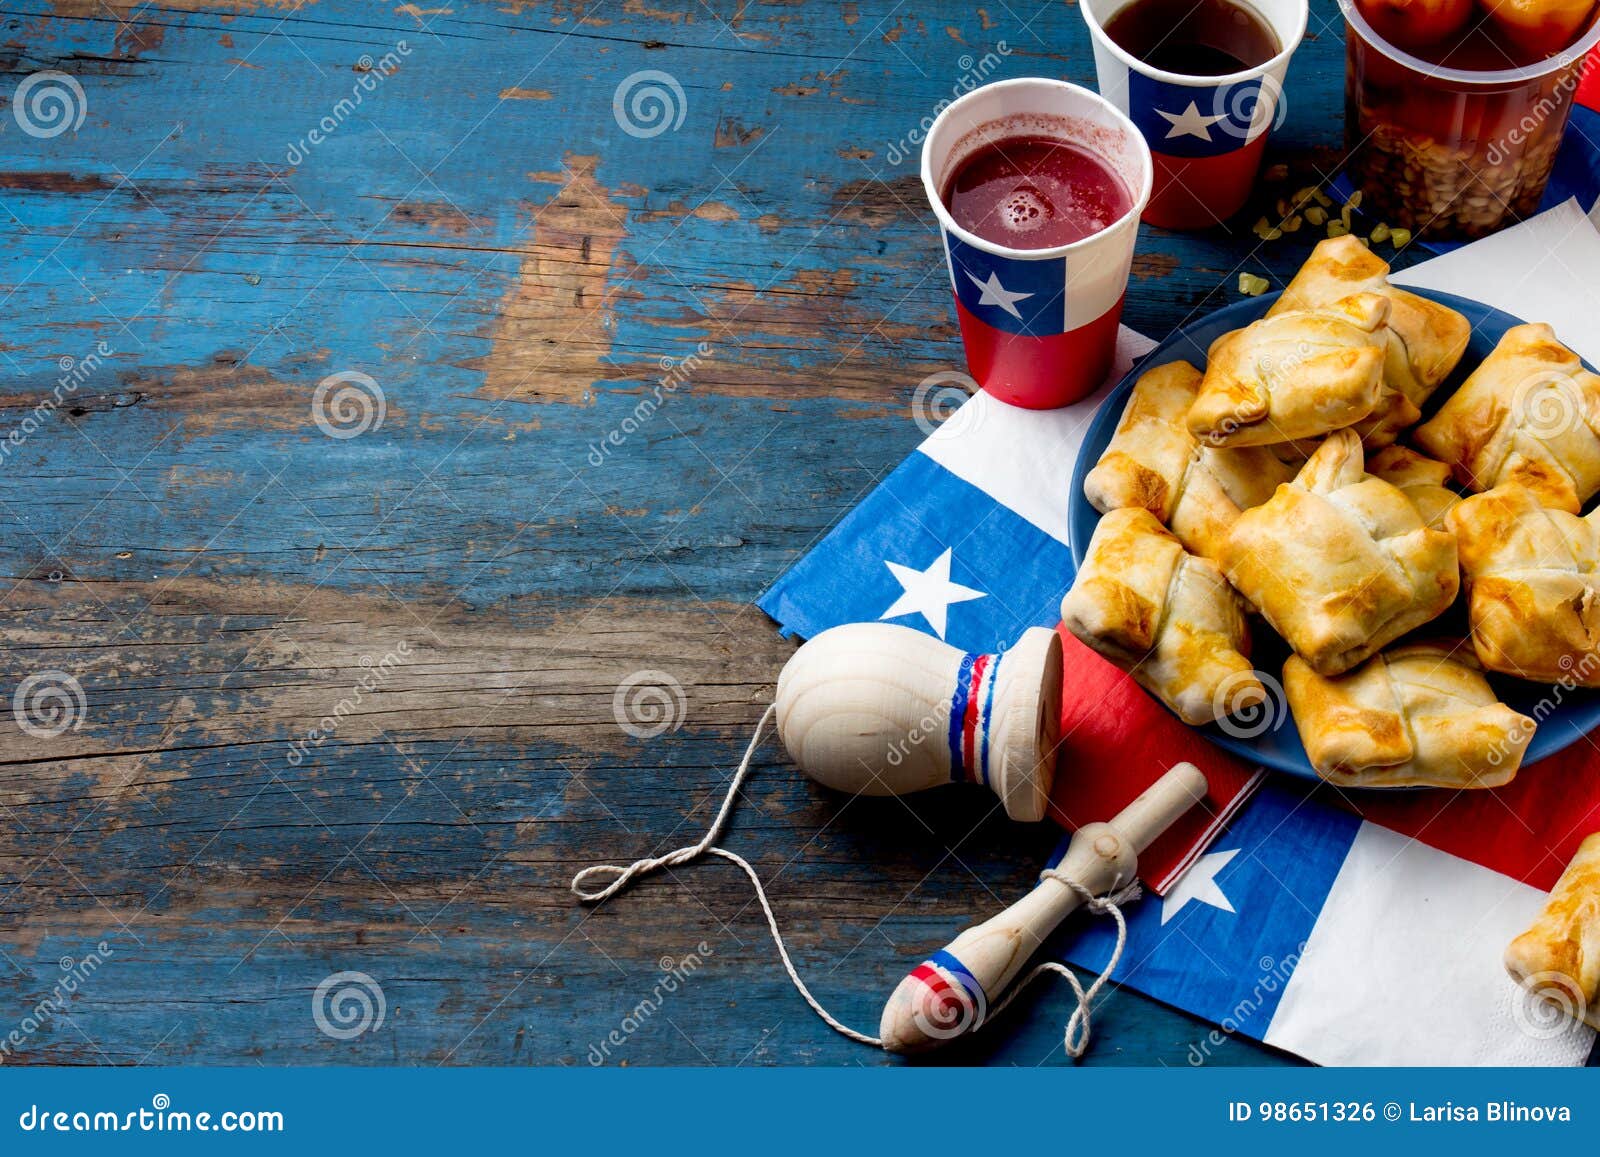 chilean independence day concept. fiestas patrias. chilean typical dish and drink on independence day party, 18